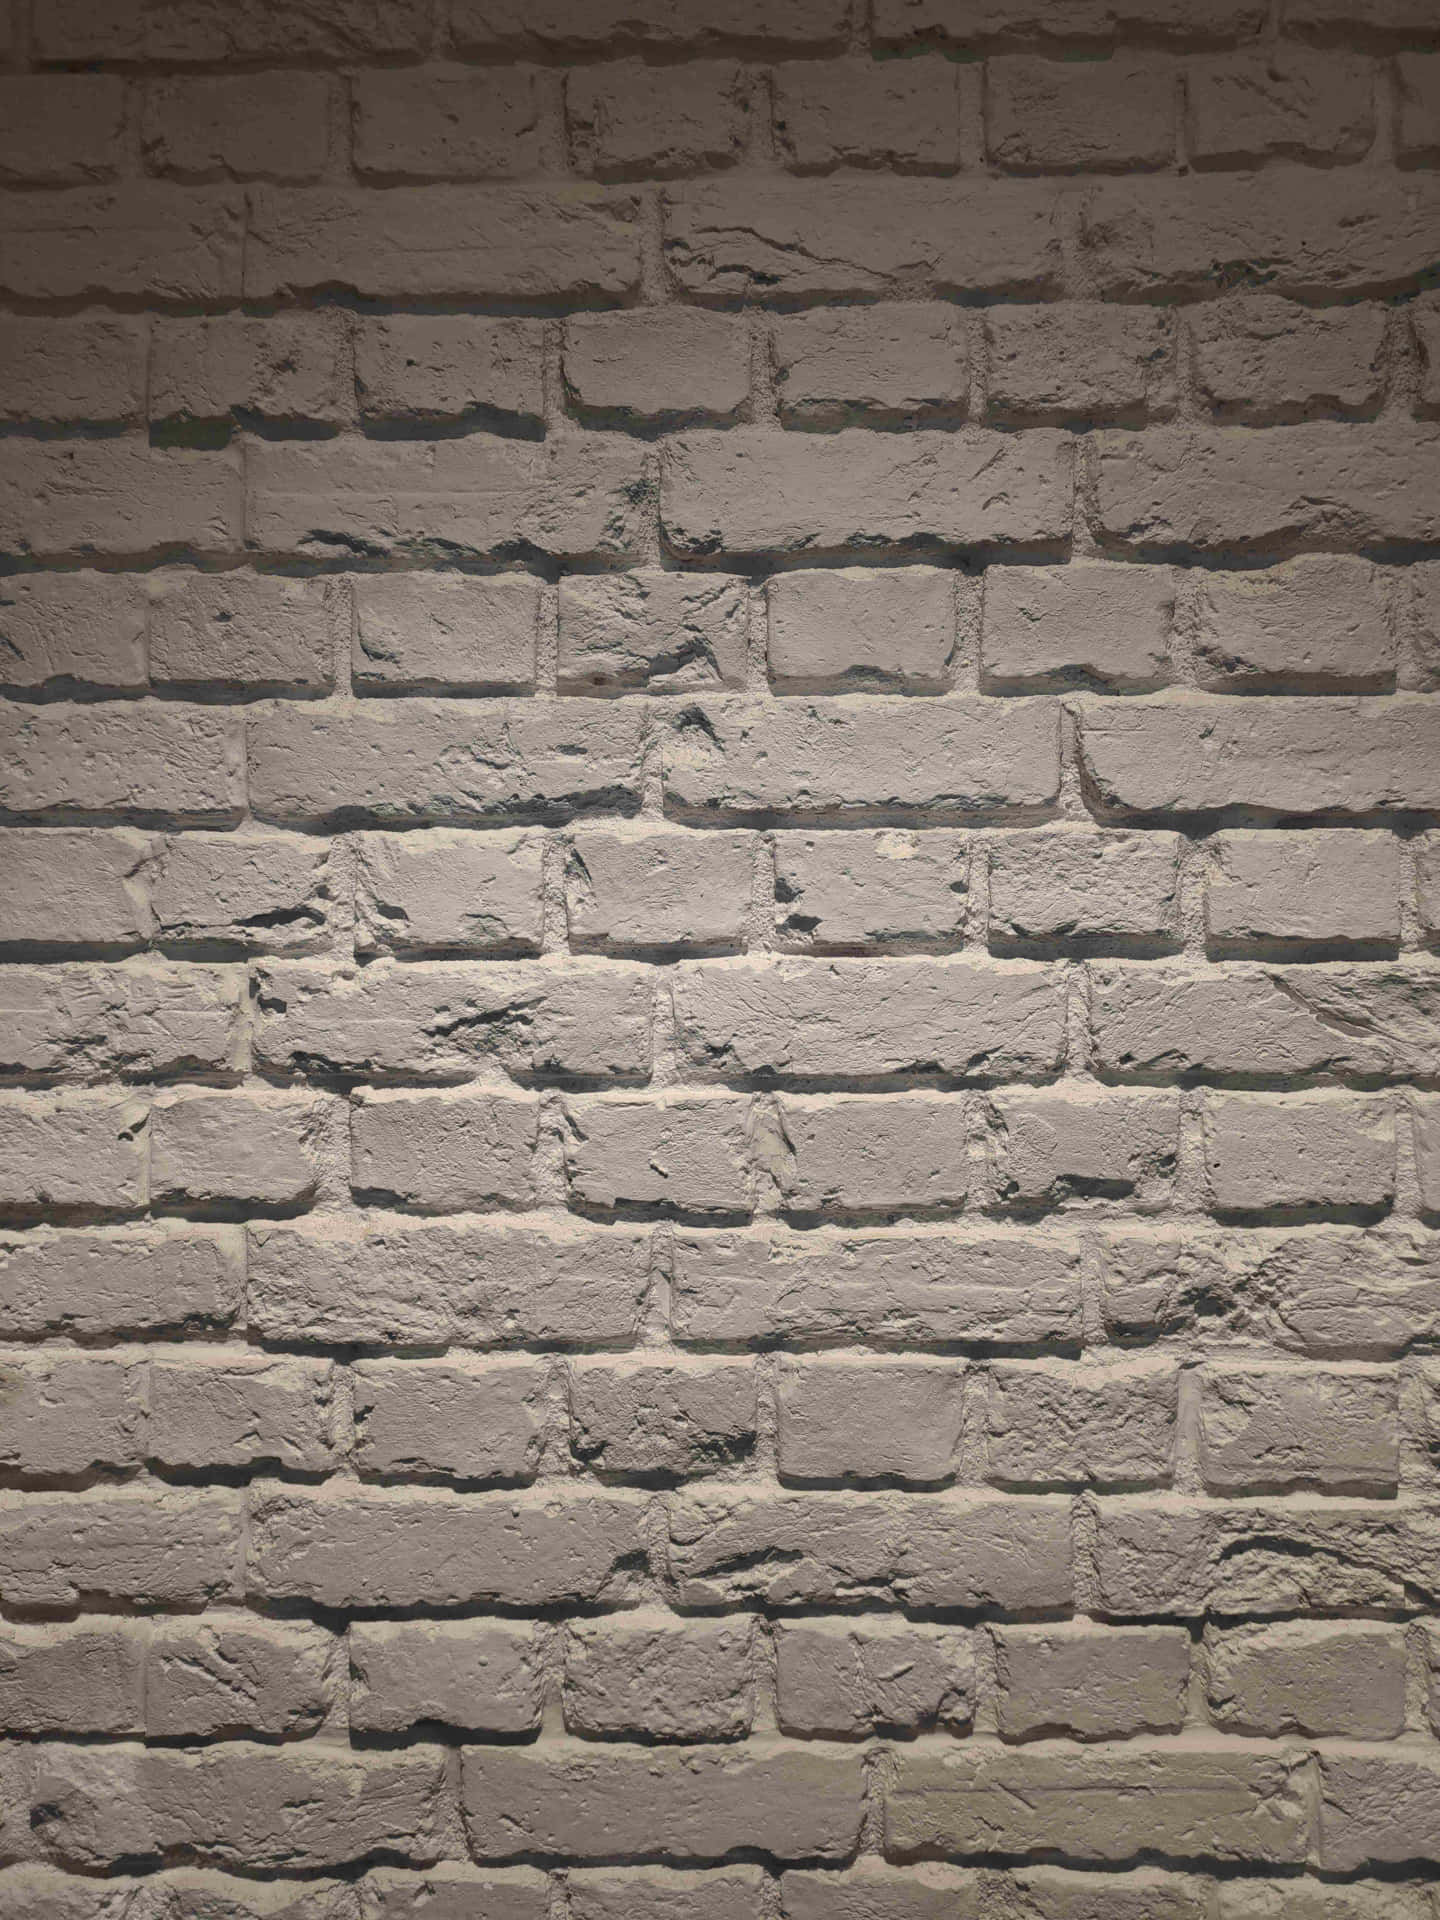 A Brick Wall With A Light On It